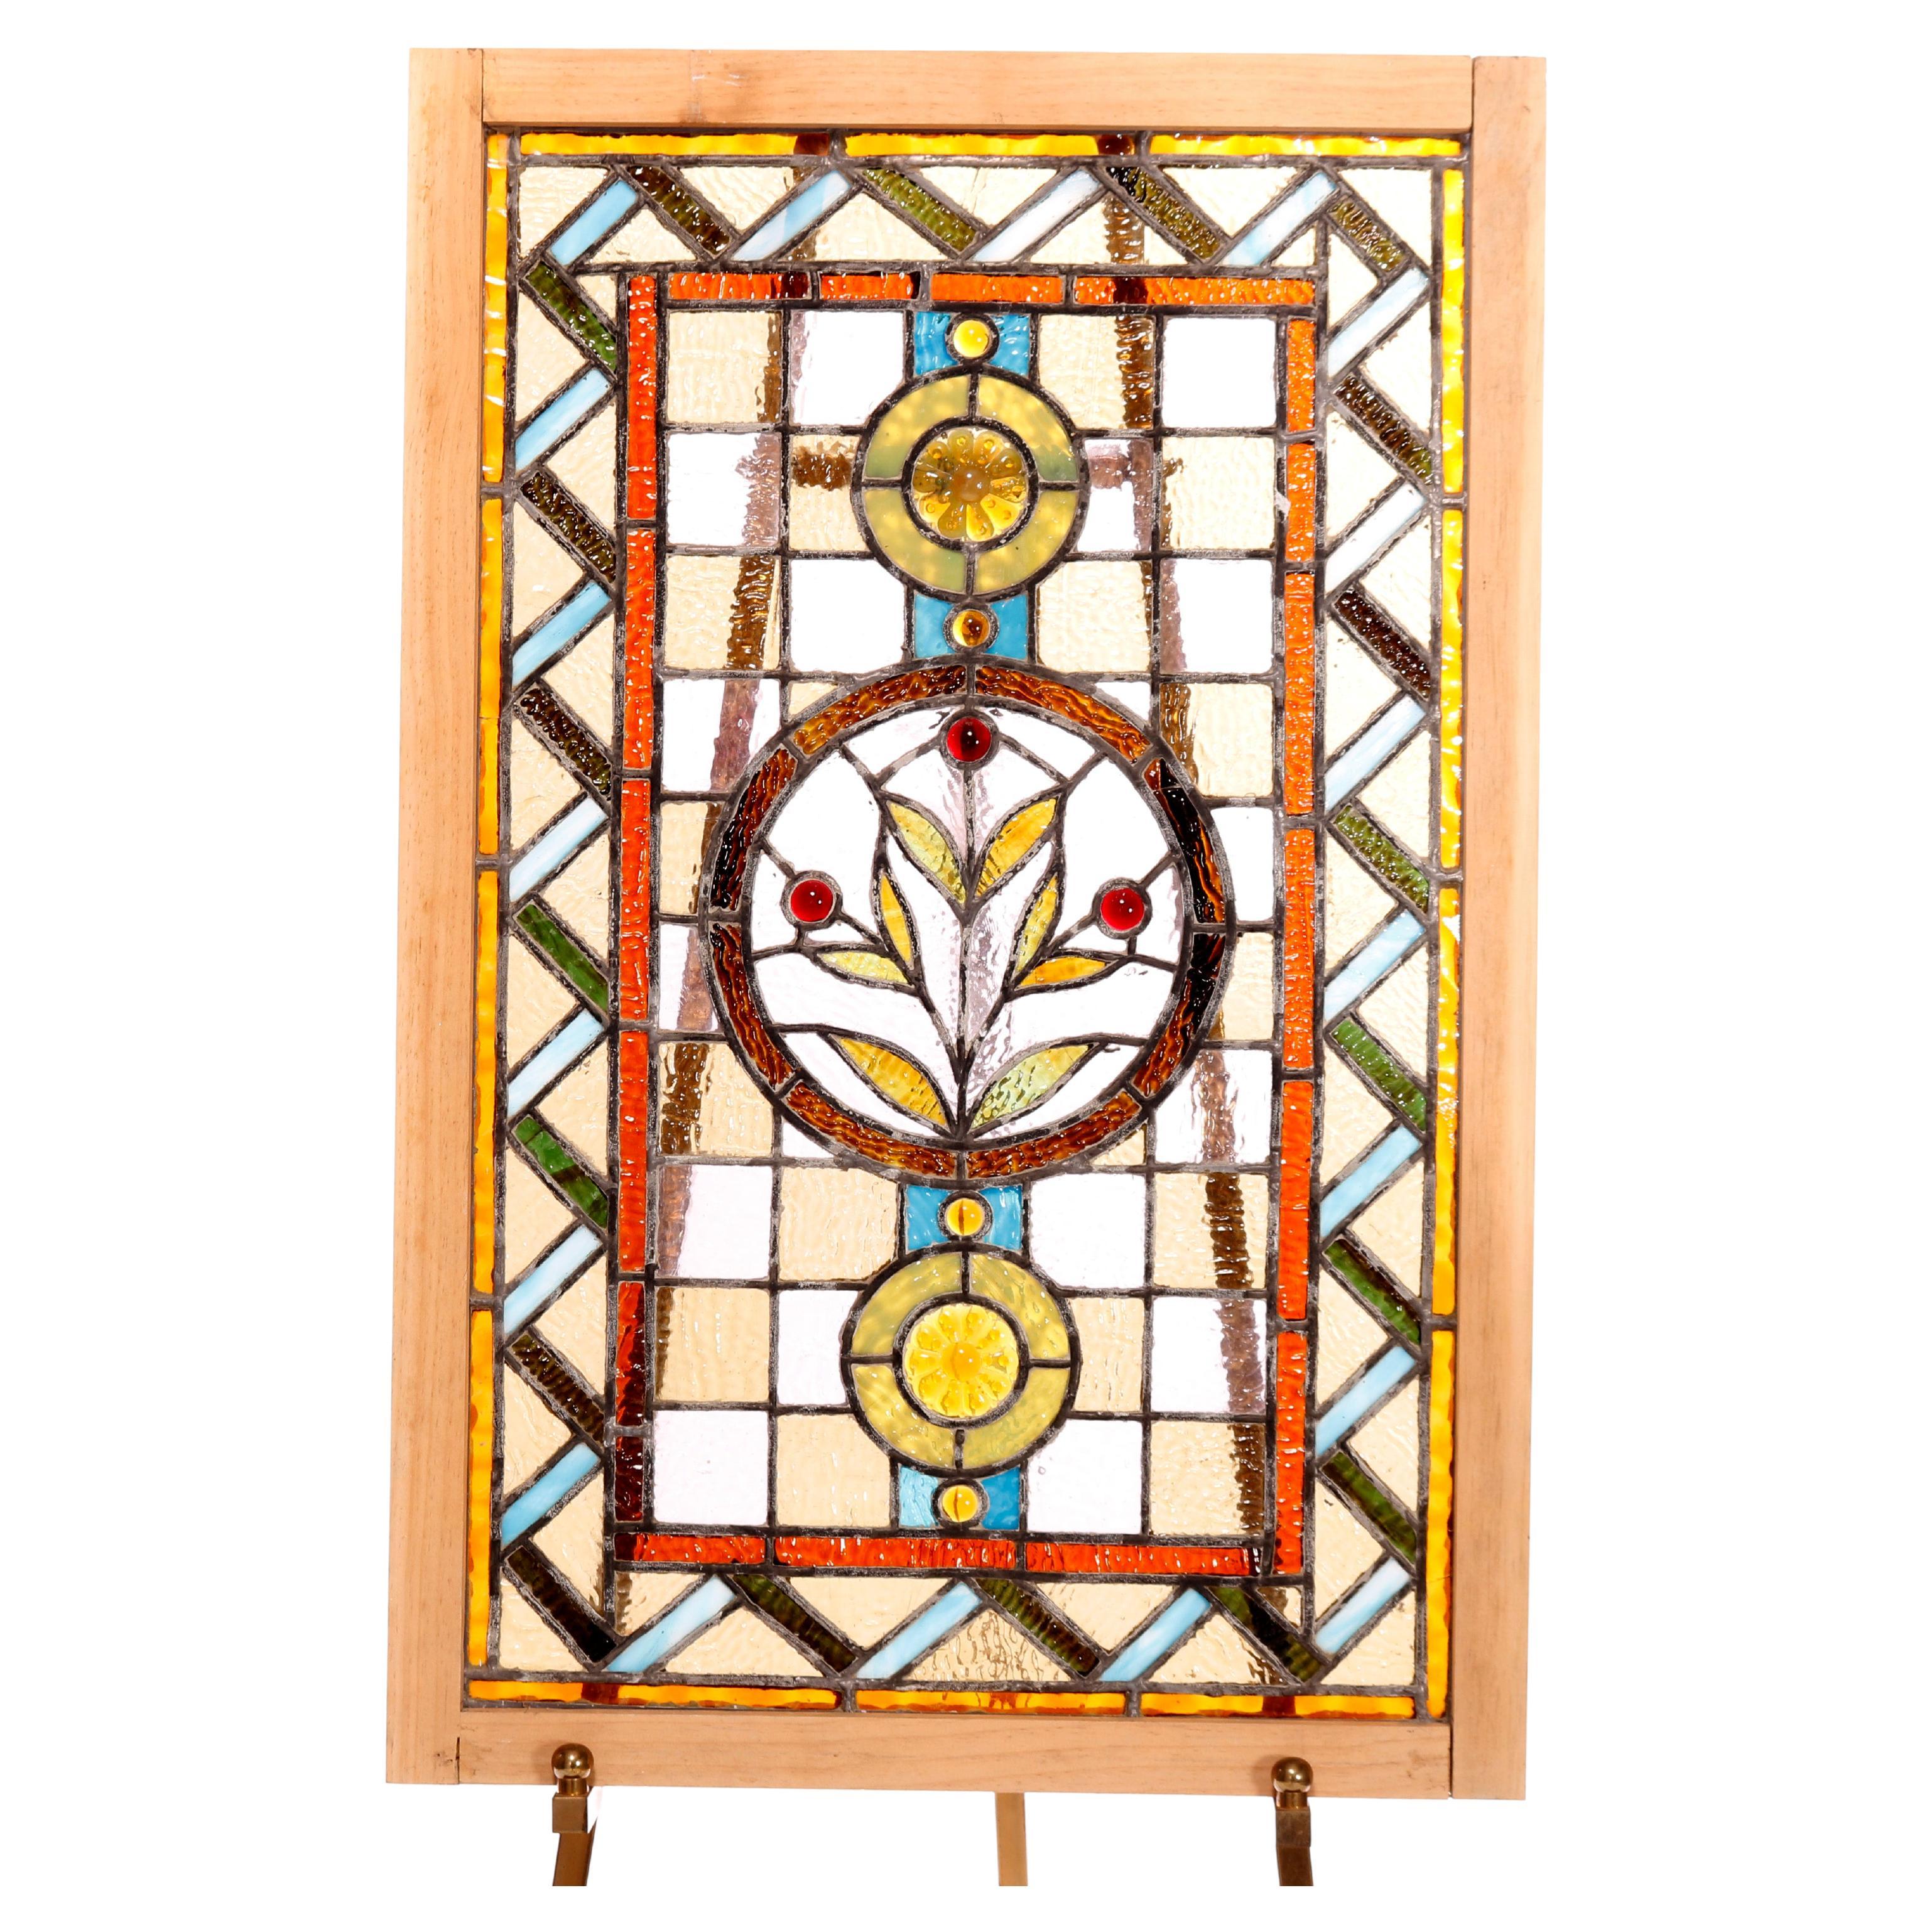 20.5"W x 34.75"H Handcrafted Jeweled stained glass window panel. 